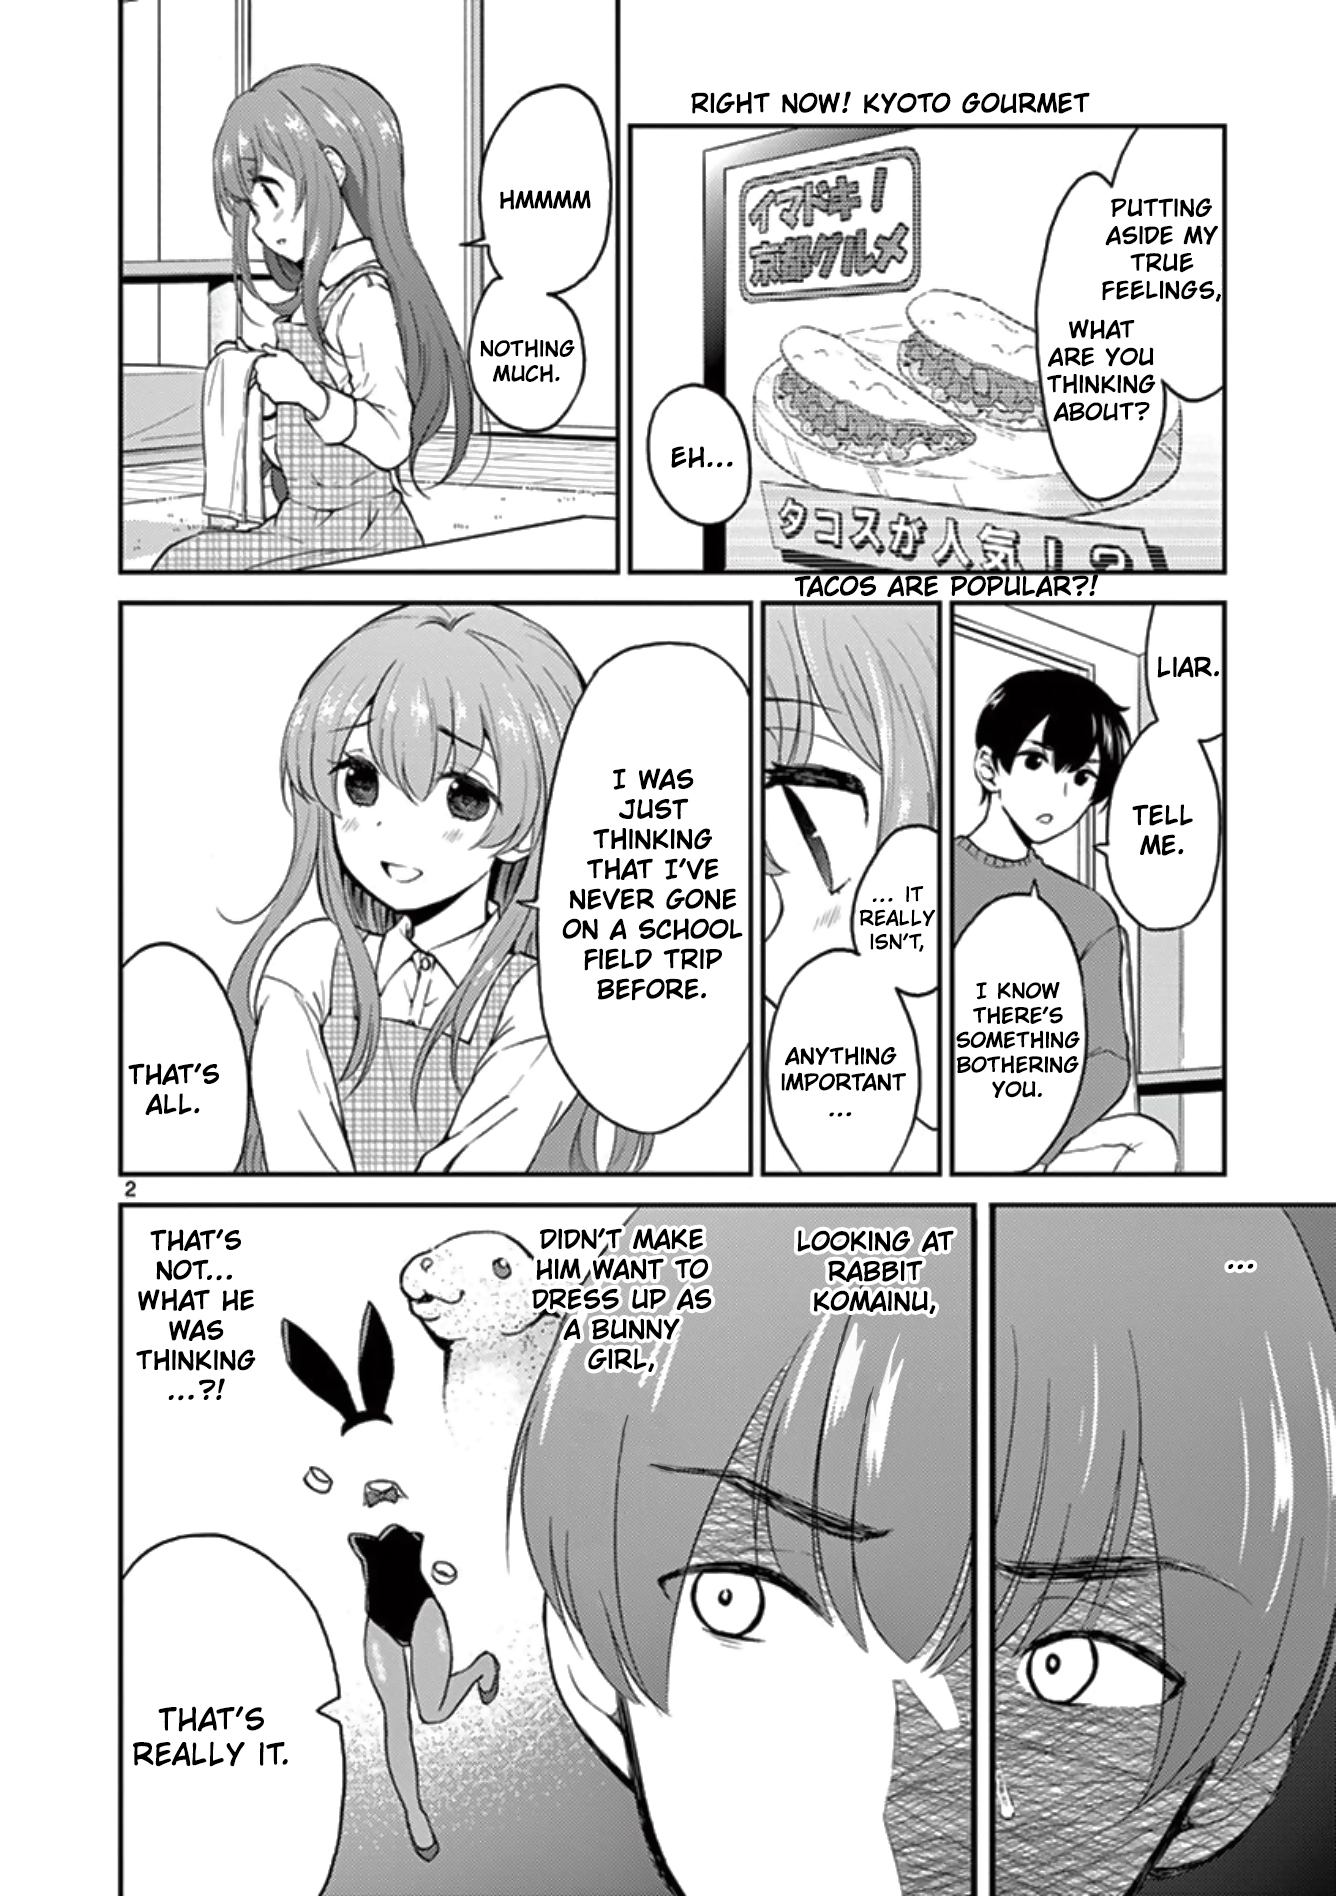 My Wife Is A Man - Page 2